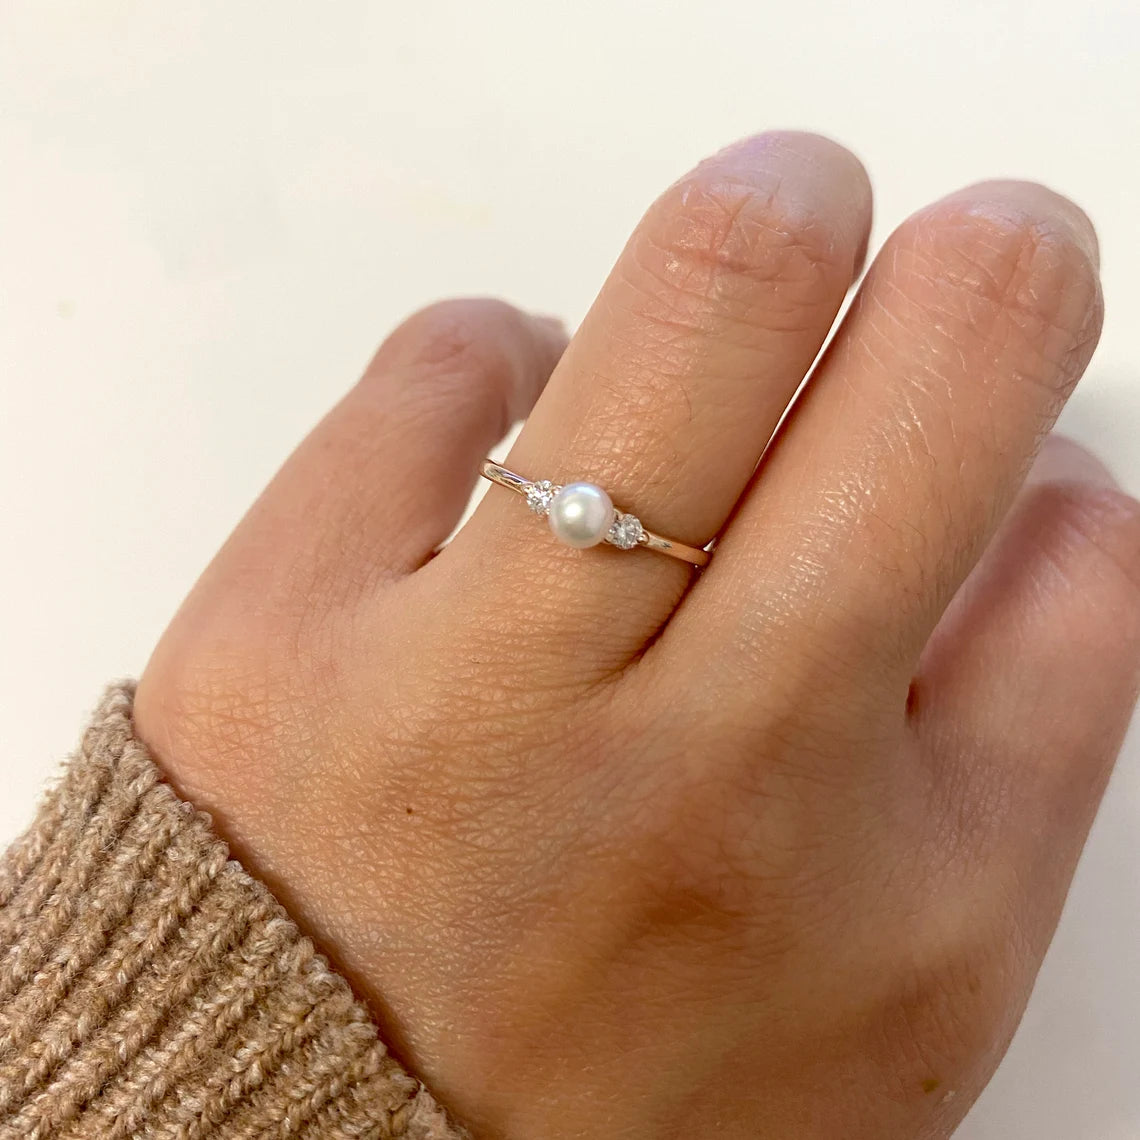 Vintage Diamond Engagement Rings | Page 3 | Gatsby Jewellery